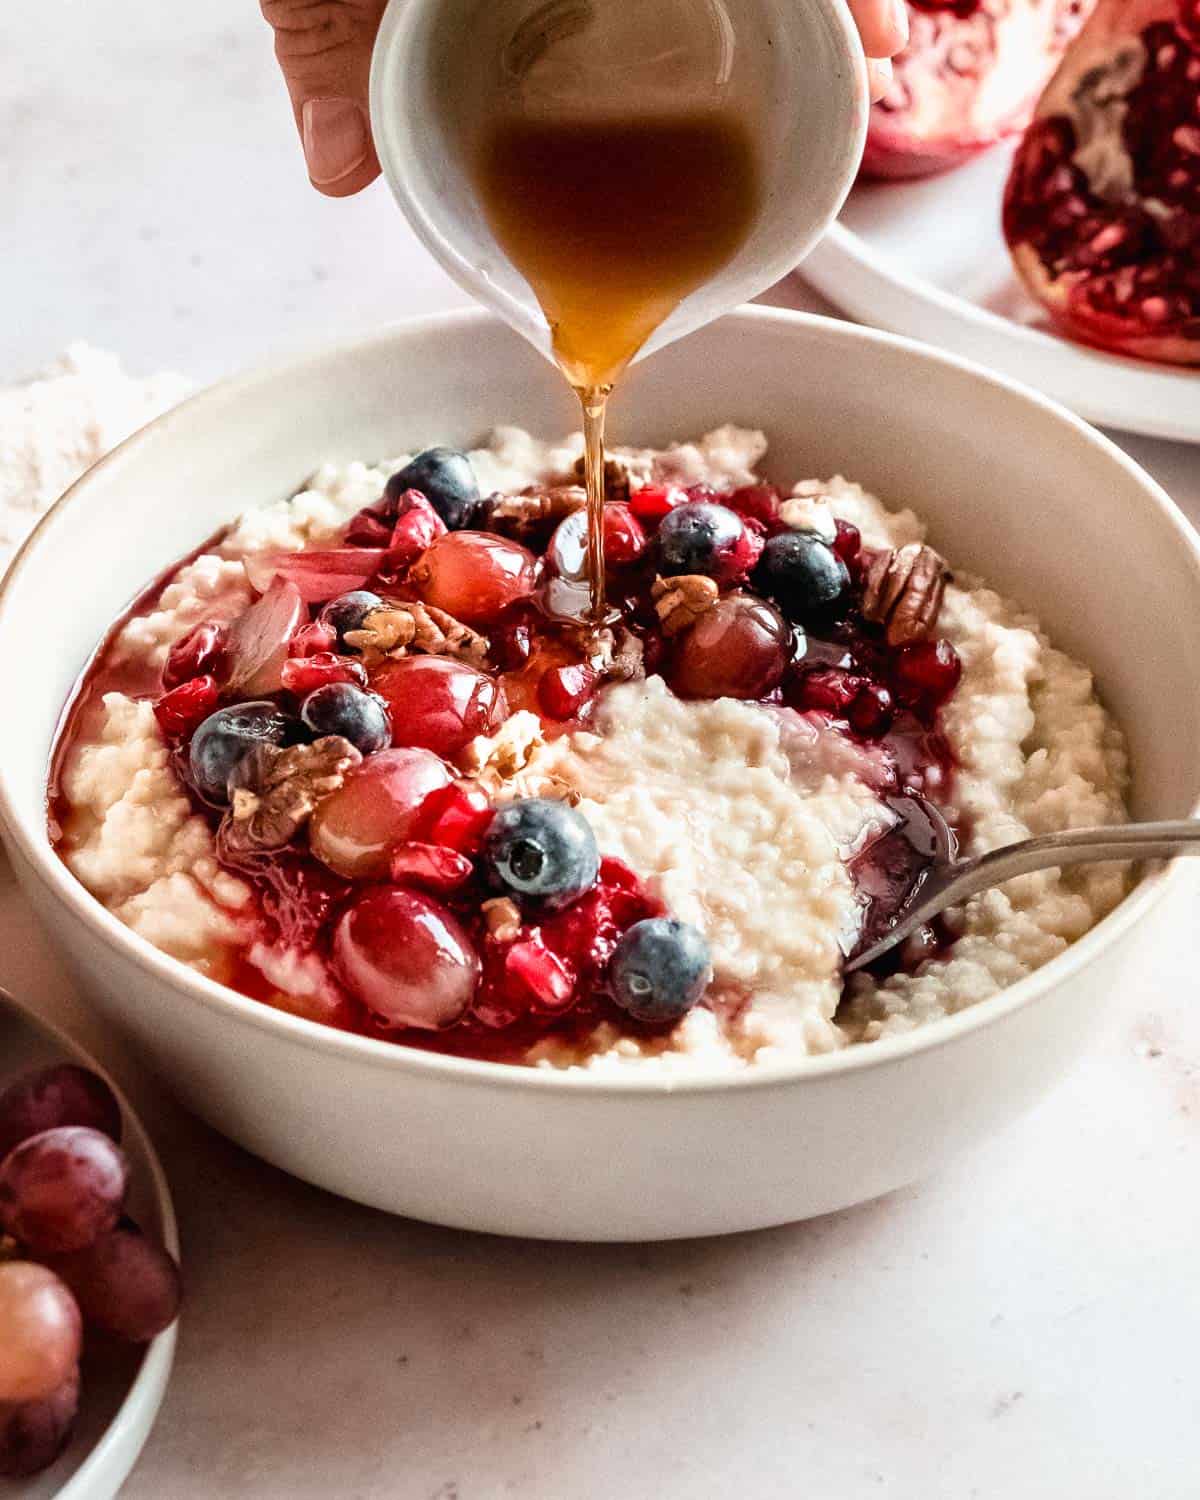 millet porridge in a bowl topped with blueberries, grapes, pomegranate seeds and pecans.. maple syrup being drizzled on.